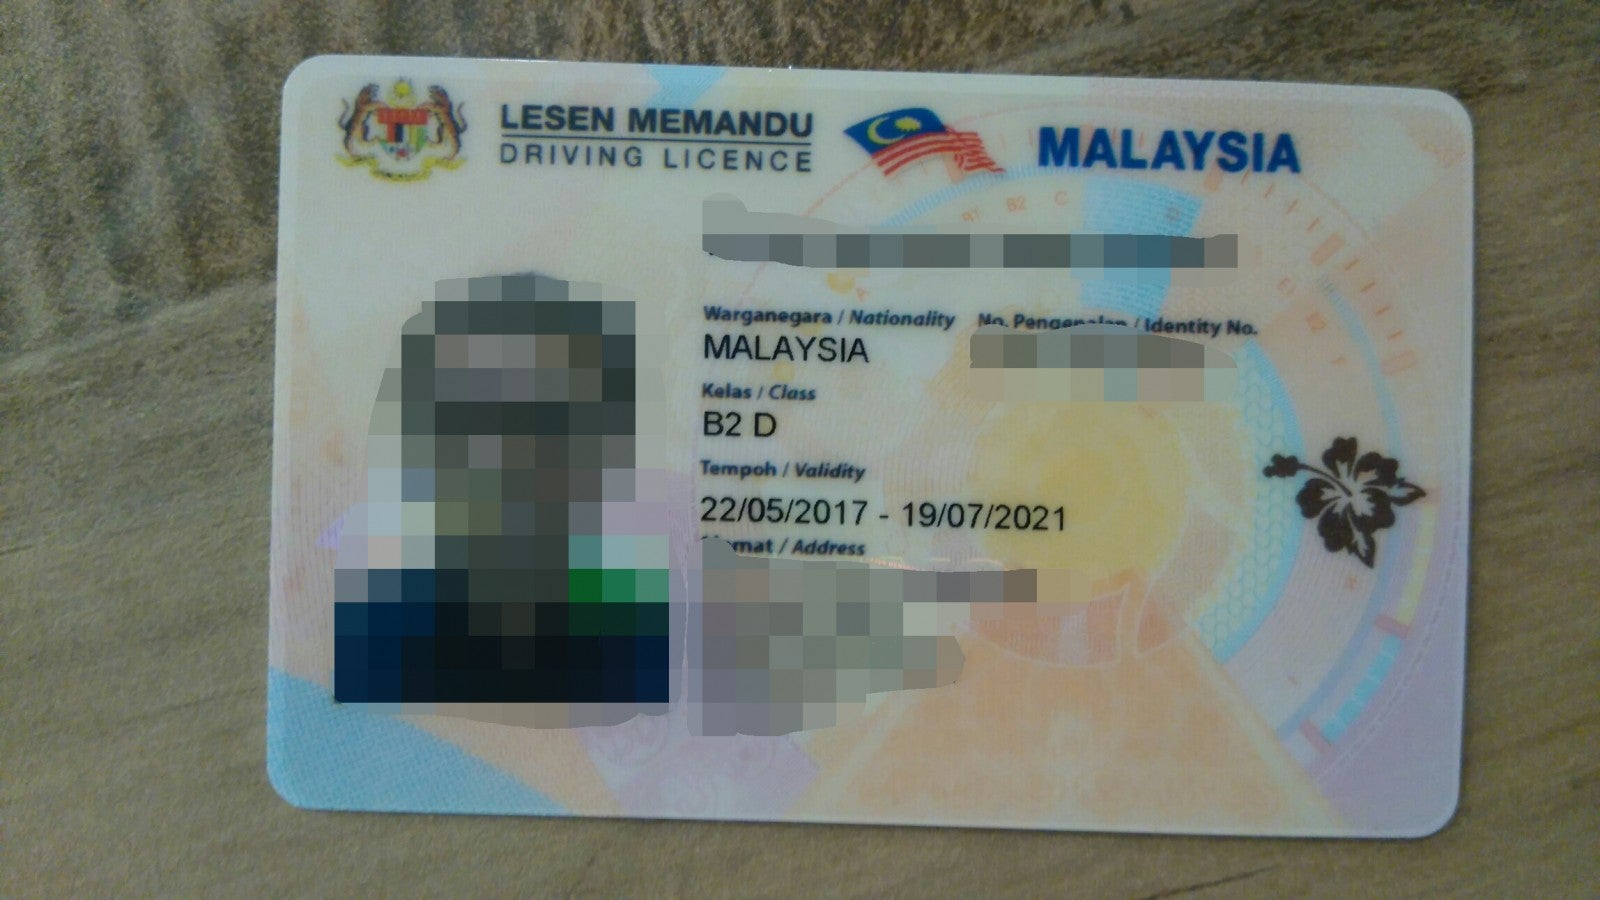 JPJ: It's Illegal if Addresses are Not Updated on Driving Licenses and Vehicles - WORLD OF BUZZ 1